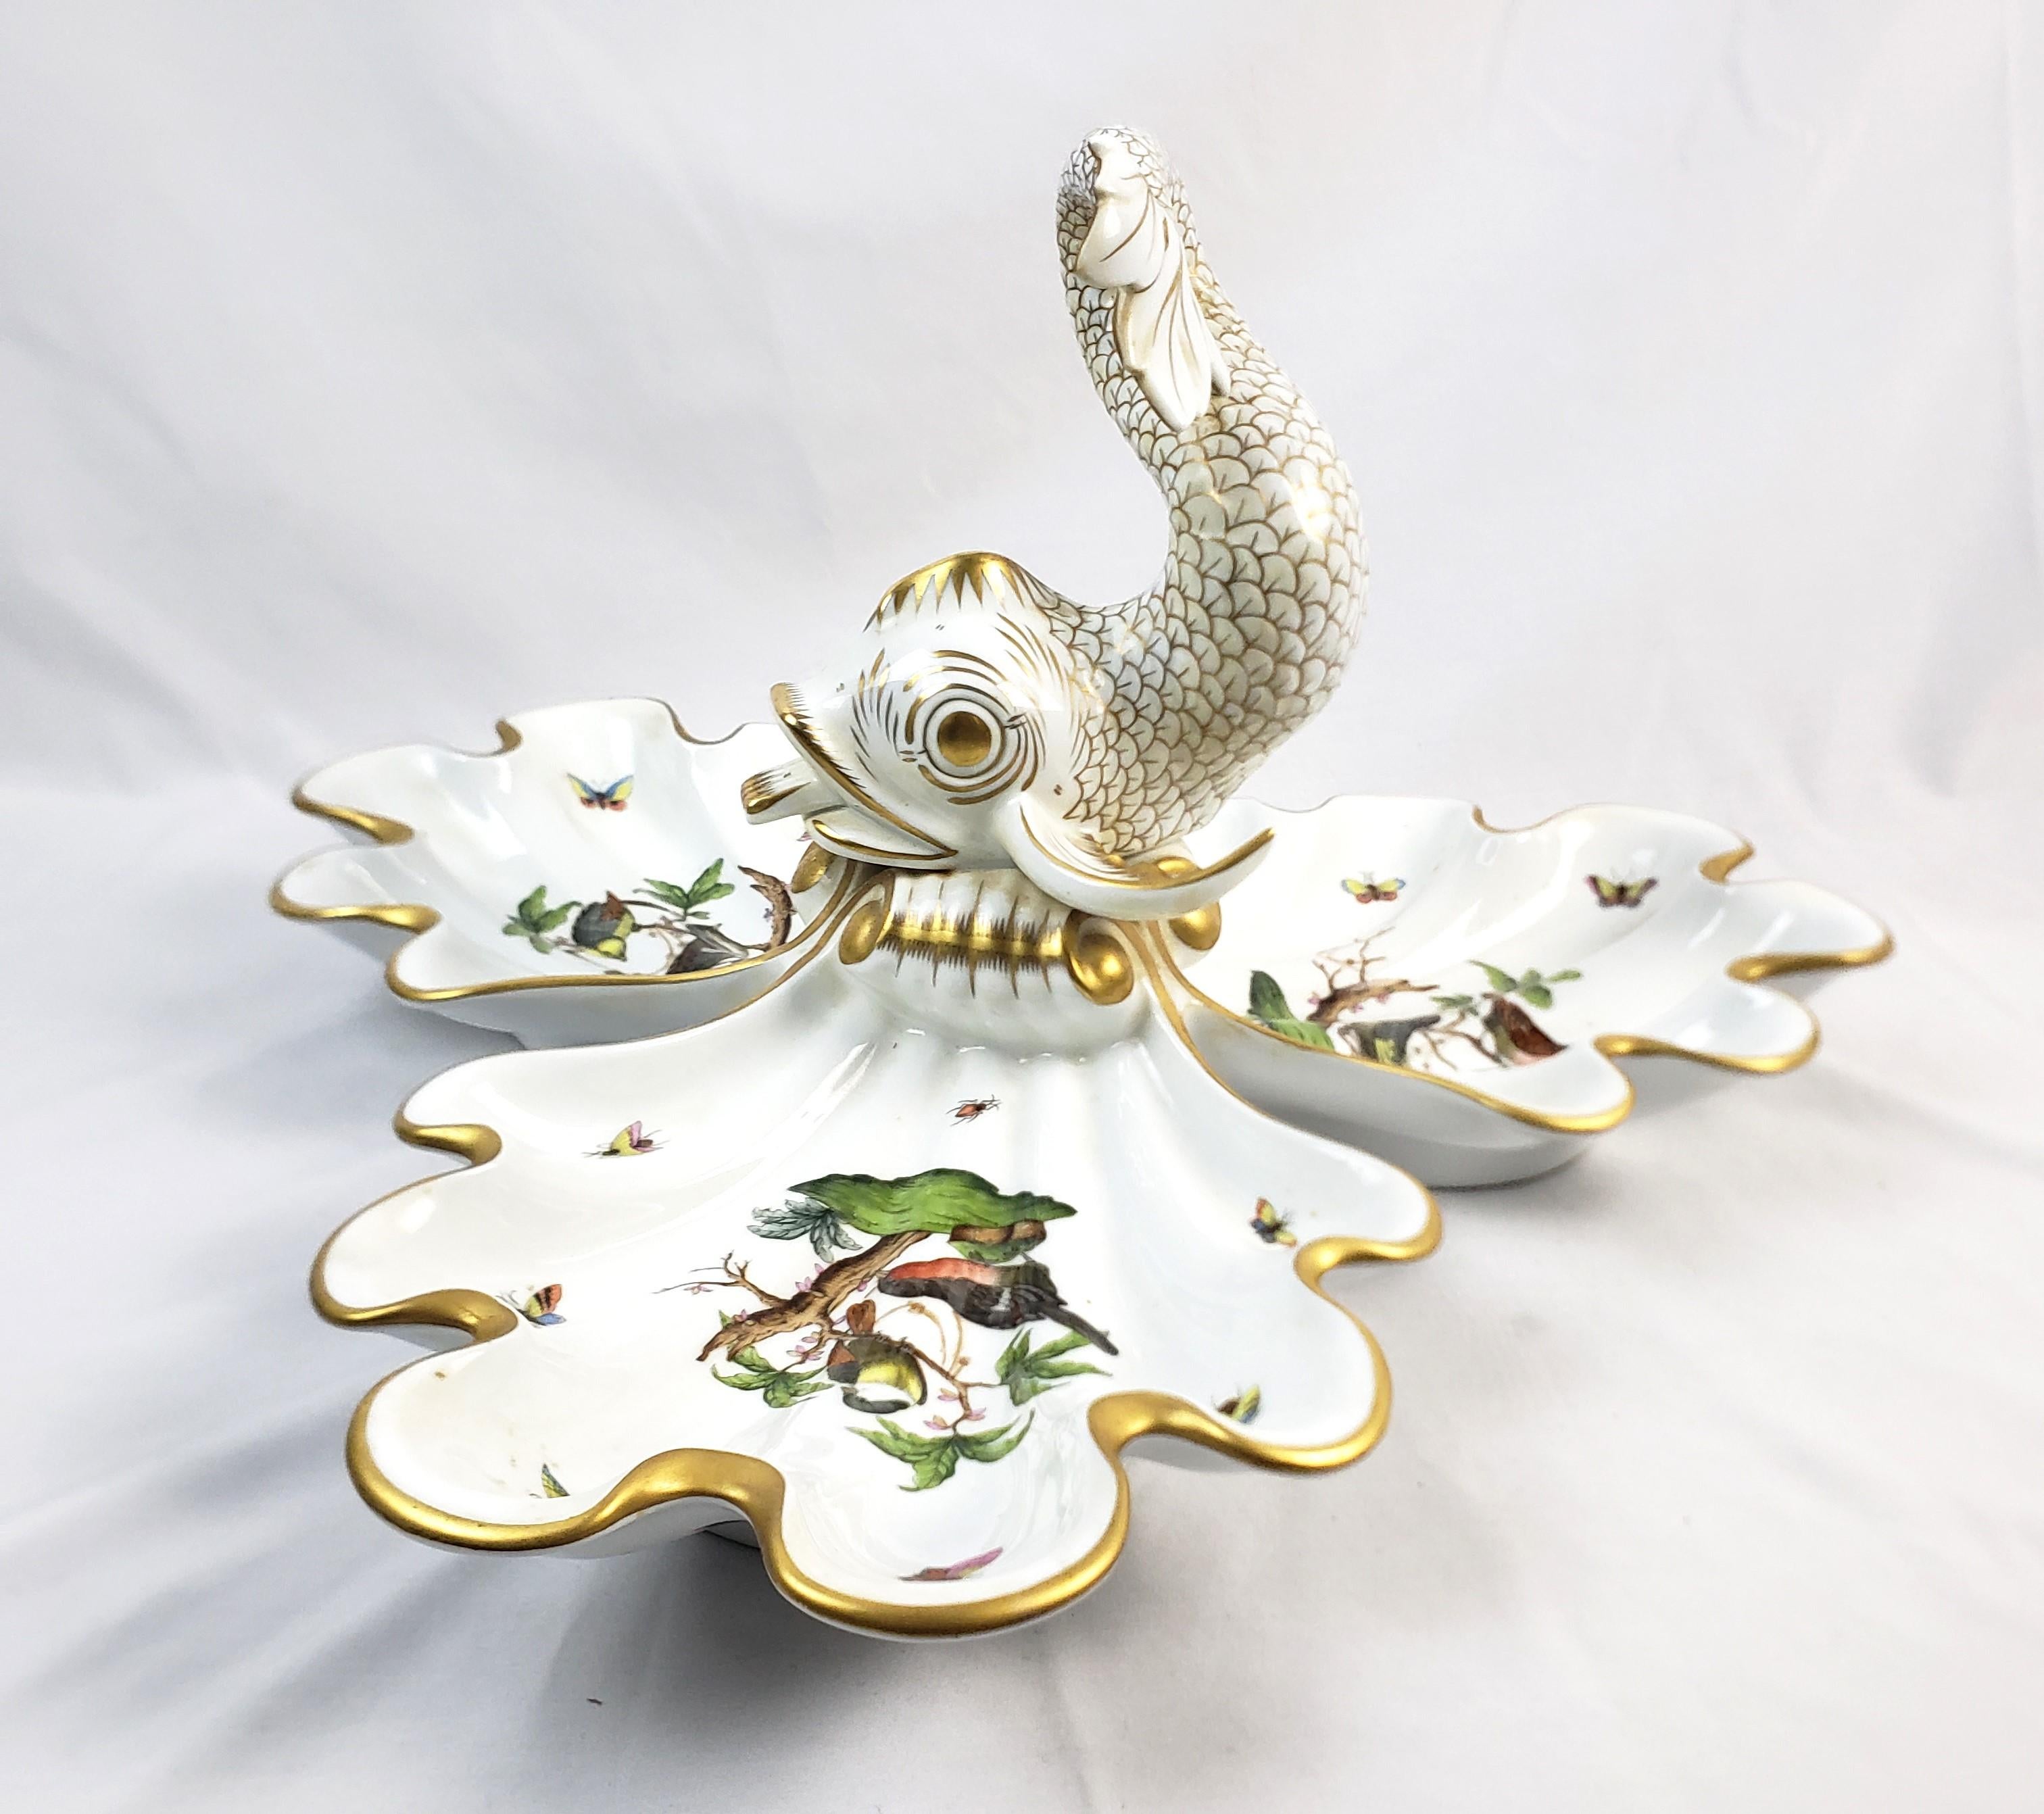 Large Vintage Herend Porcelain Rothschild Bird Pattern Centerpiece with Coy Fish For Sale 3